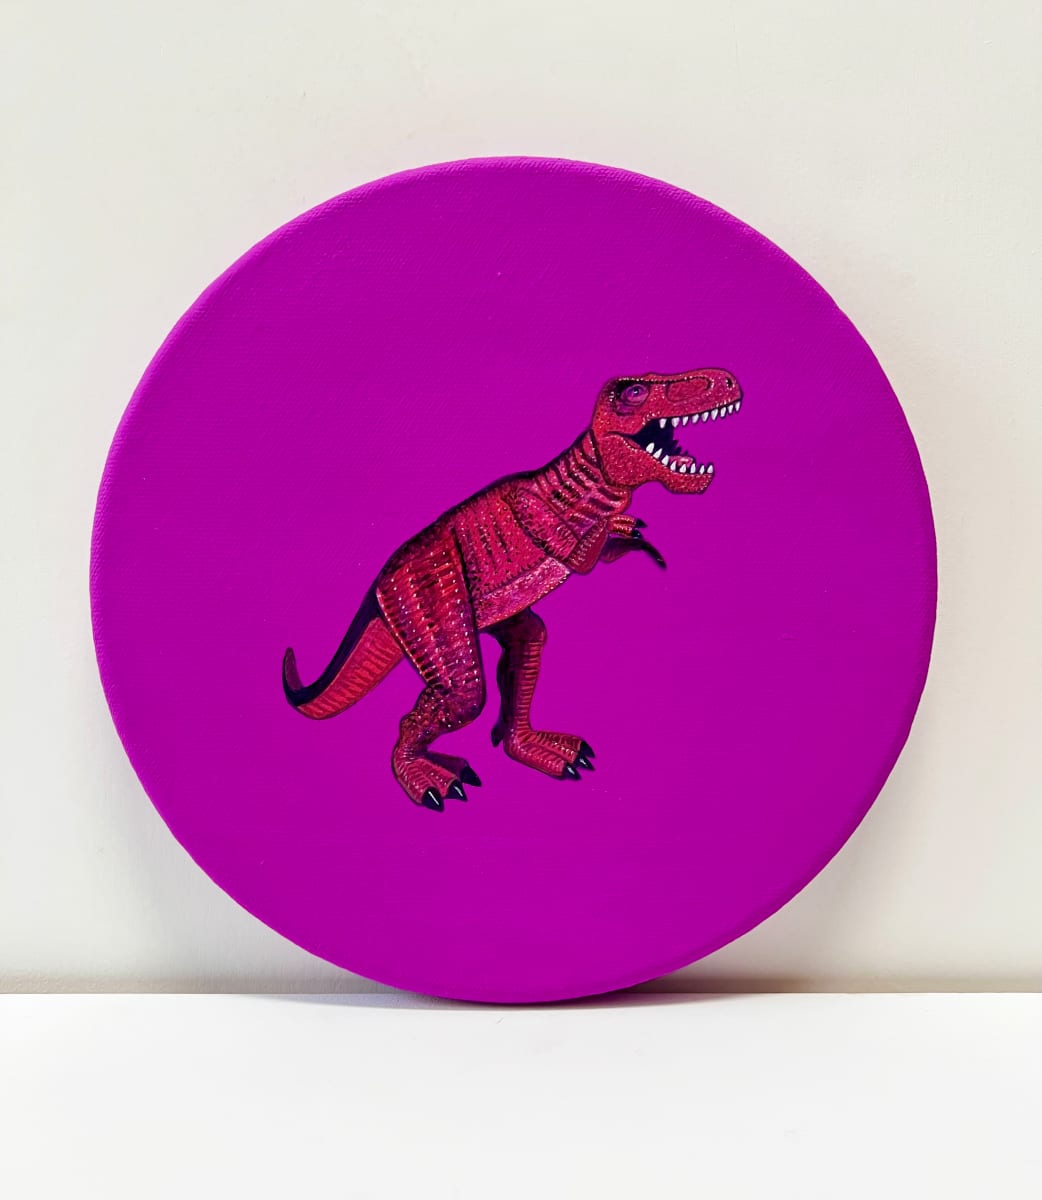 Tondo Rex - Red on Pink Violet by Colleen Critcher 